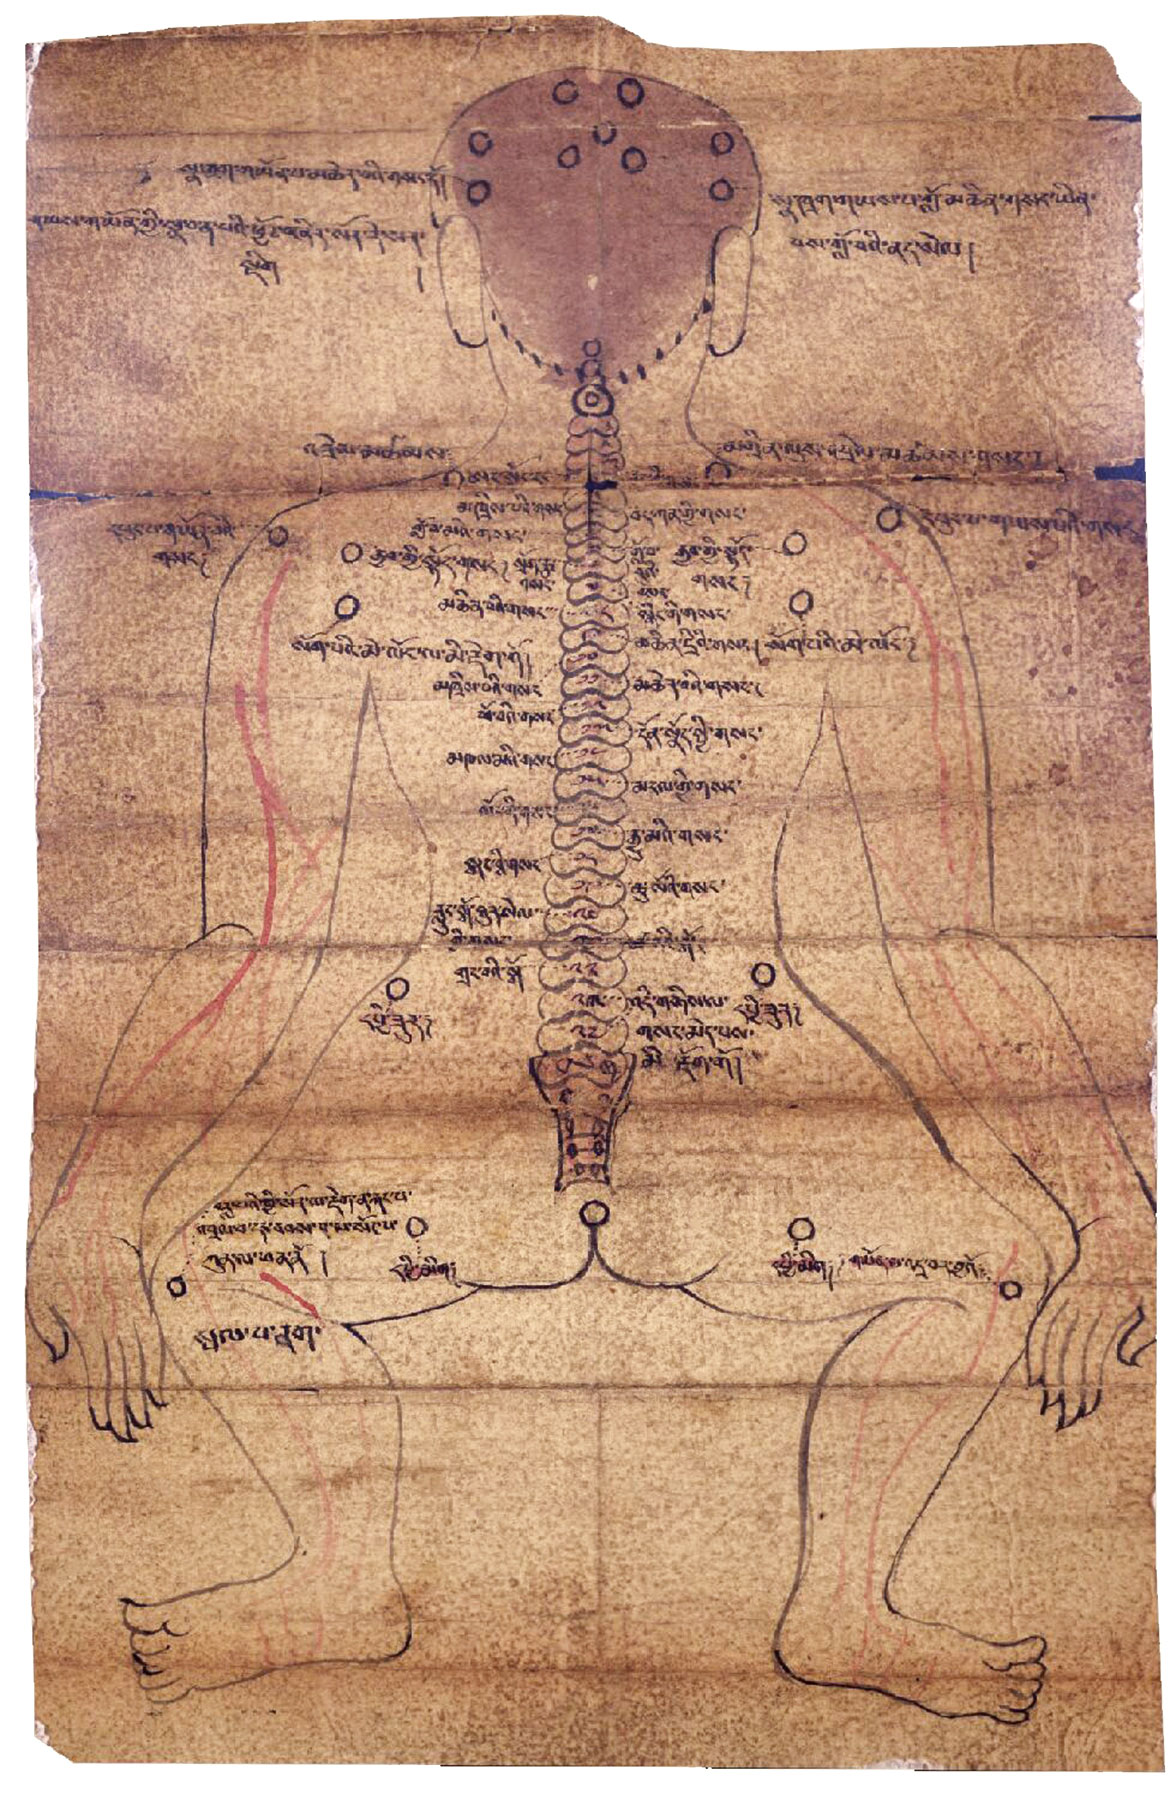 Moxibustion Chart (back view), Tibet, 19th century. Ink and color on paper, 13 1/2 x 8 3/4 in.